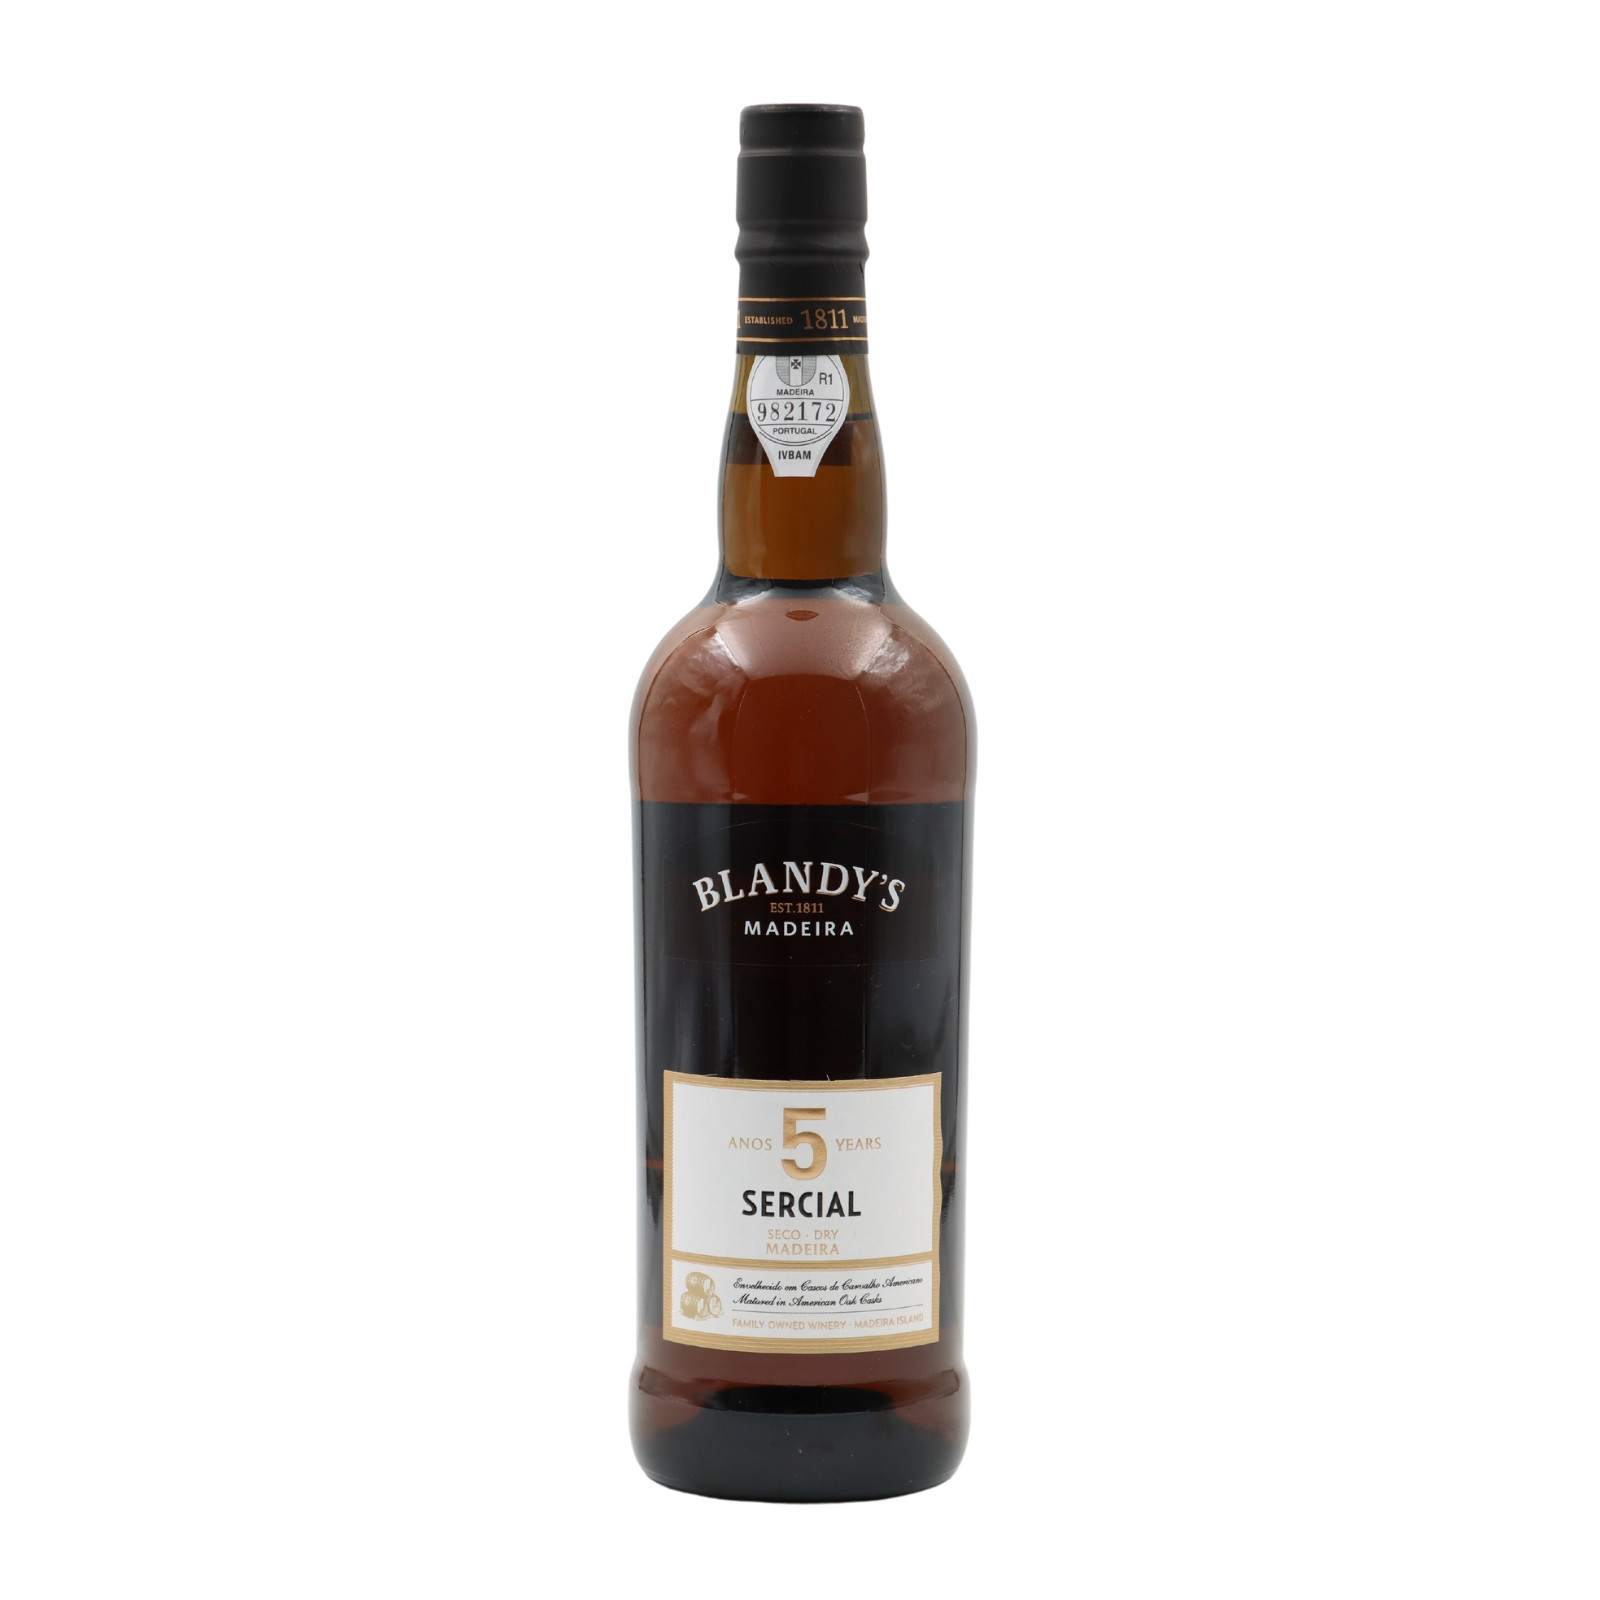 Blandys 5 years Sercial Dry Madeira